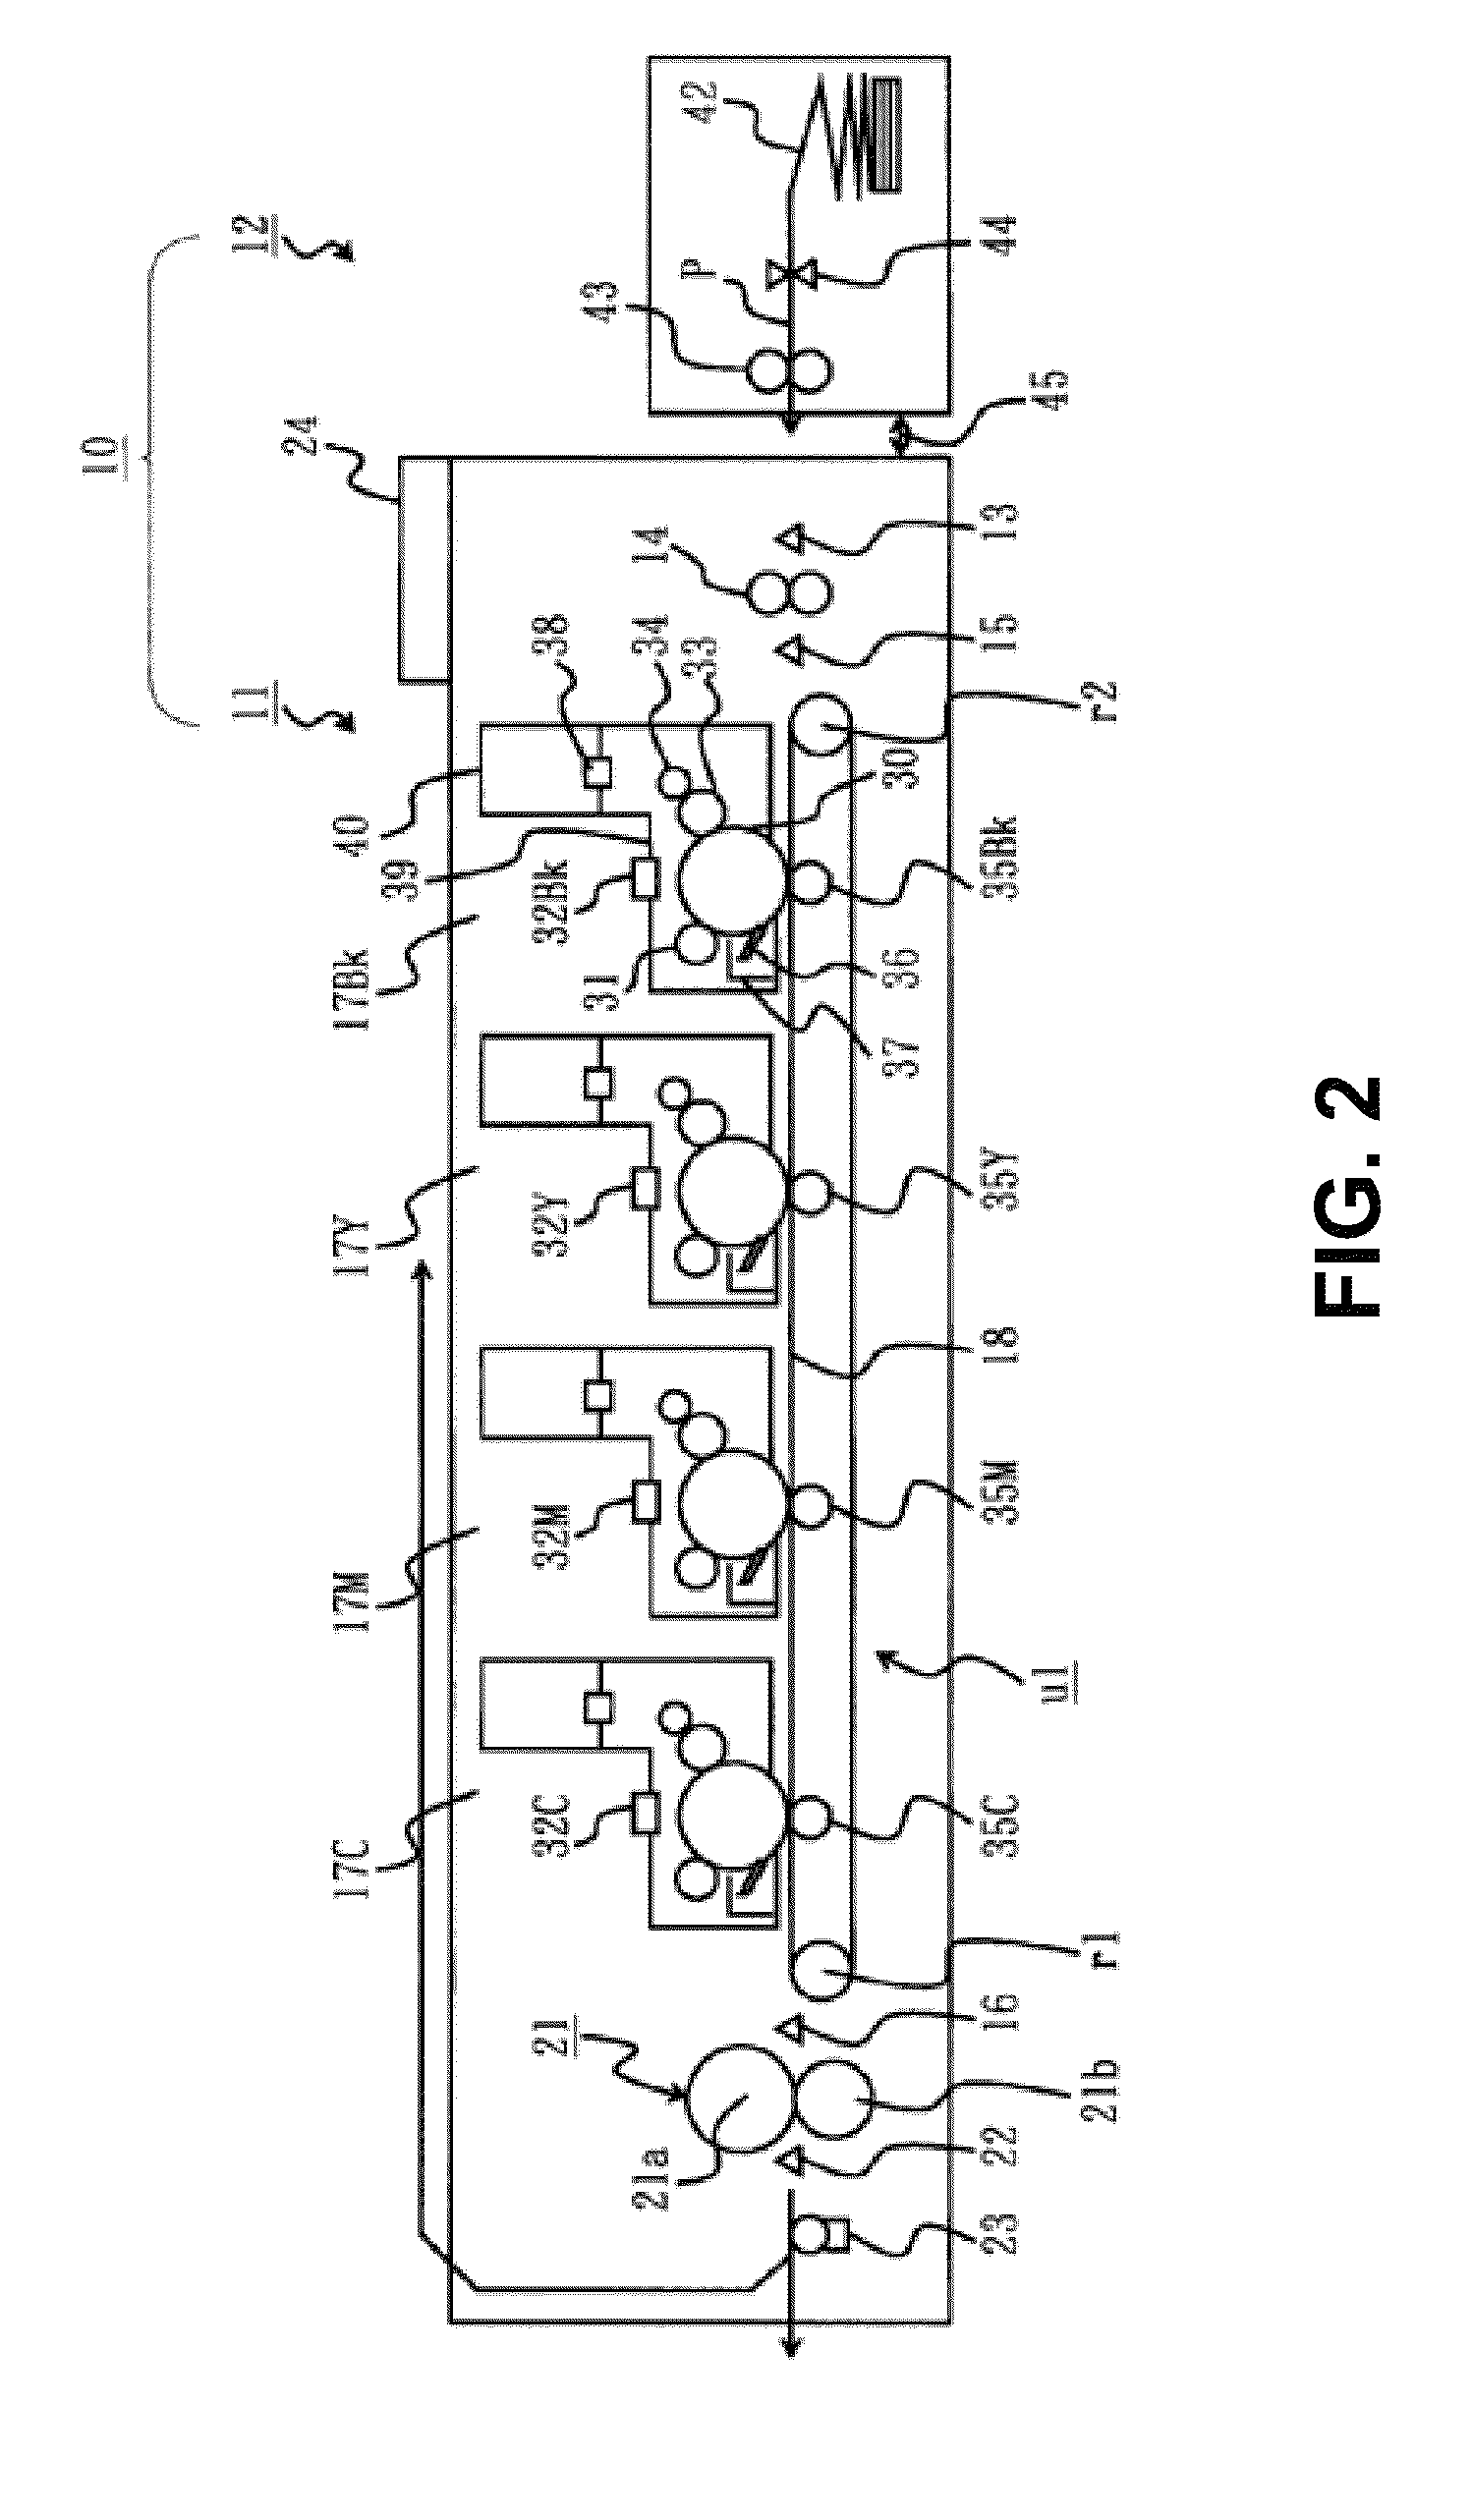 Image forming apparatus with printing processing unit